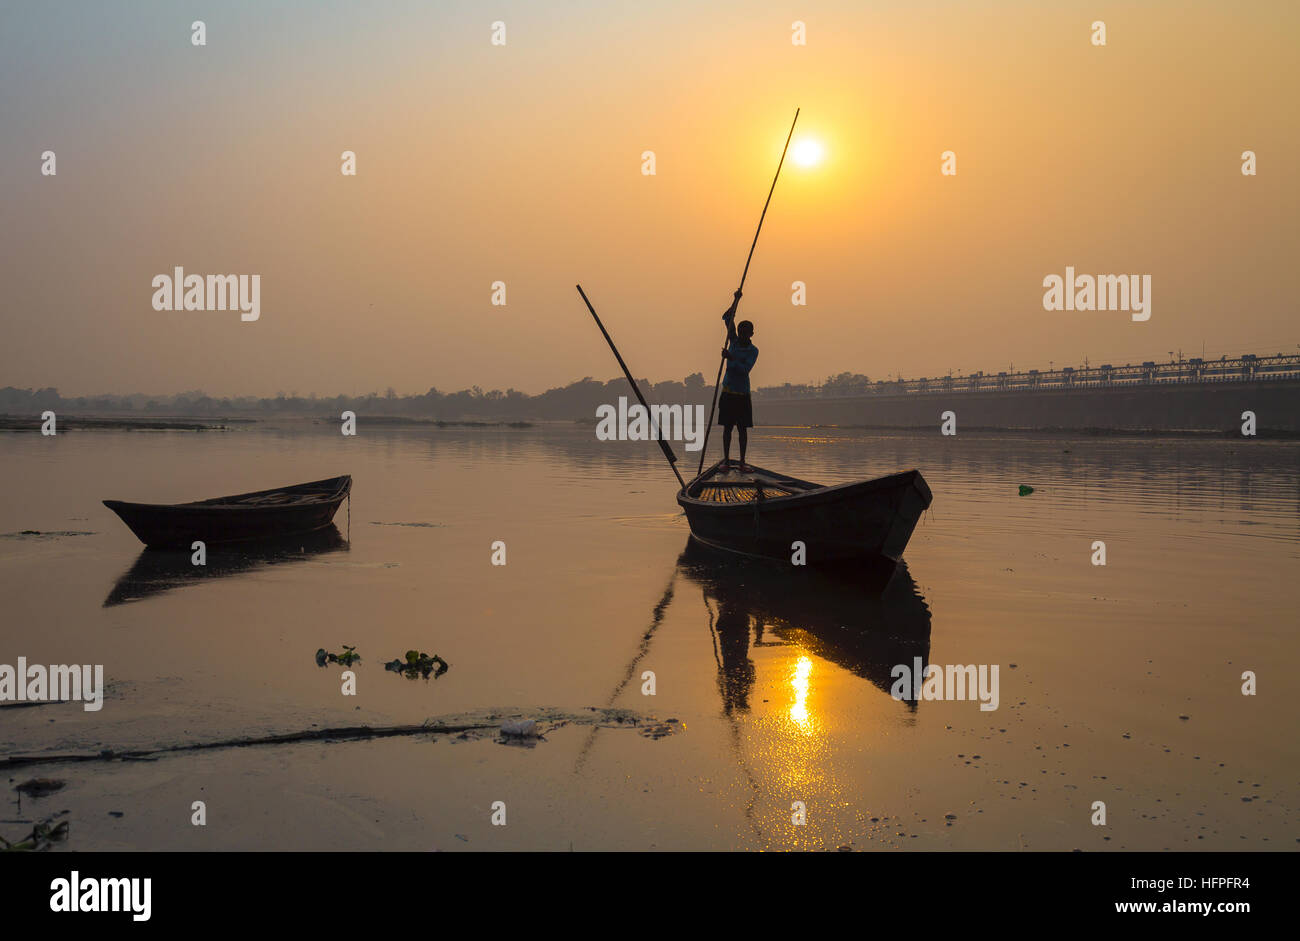 Silhouette boat with oarsman at sunset on river Damodar, Durgapur Barrage, West Bengal, India. Stock Photo